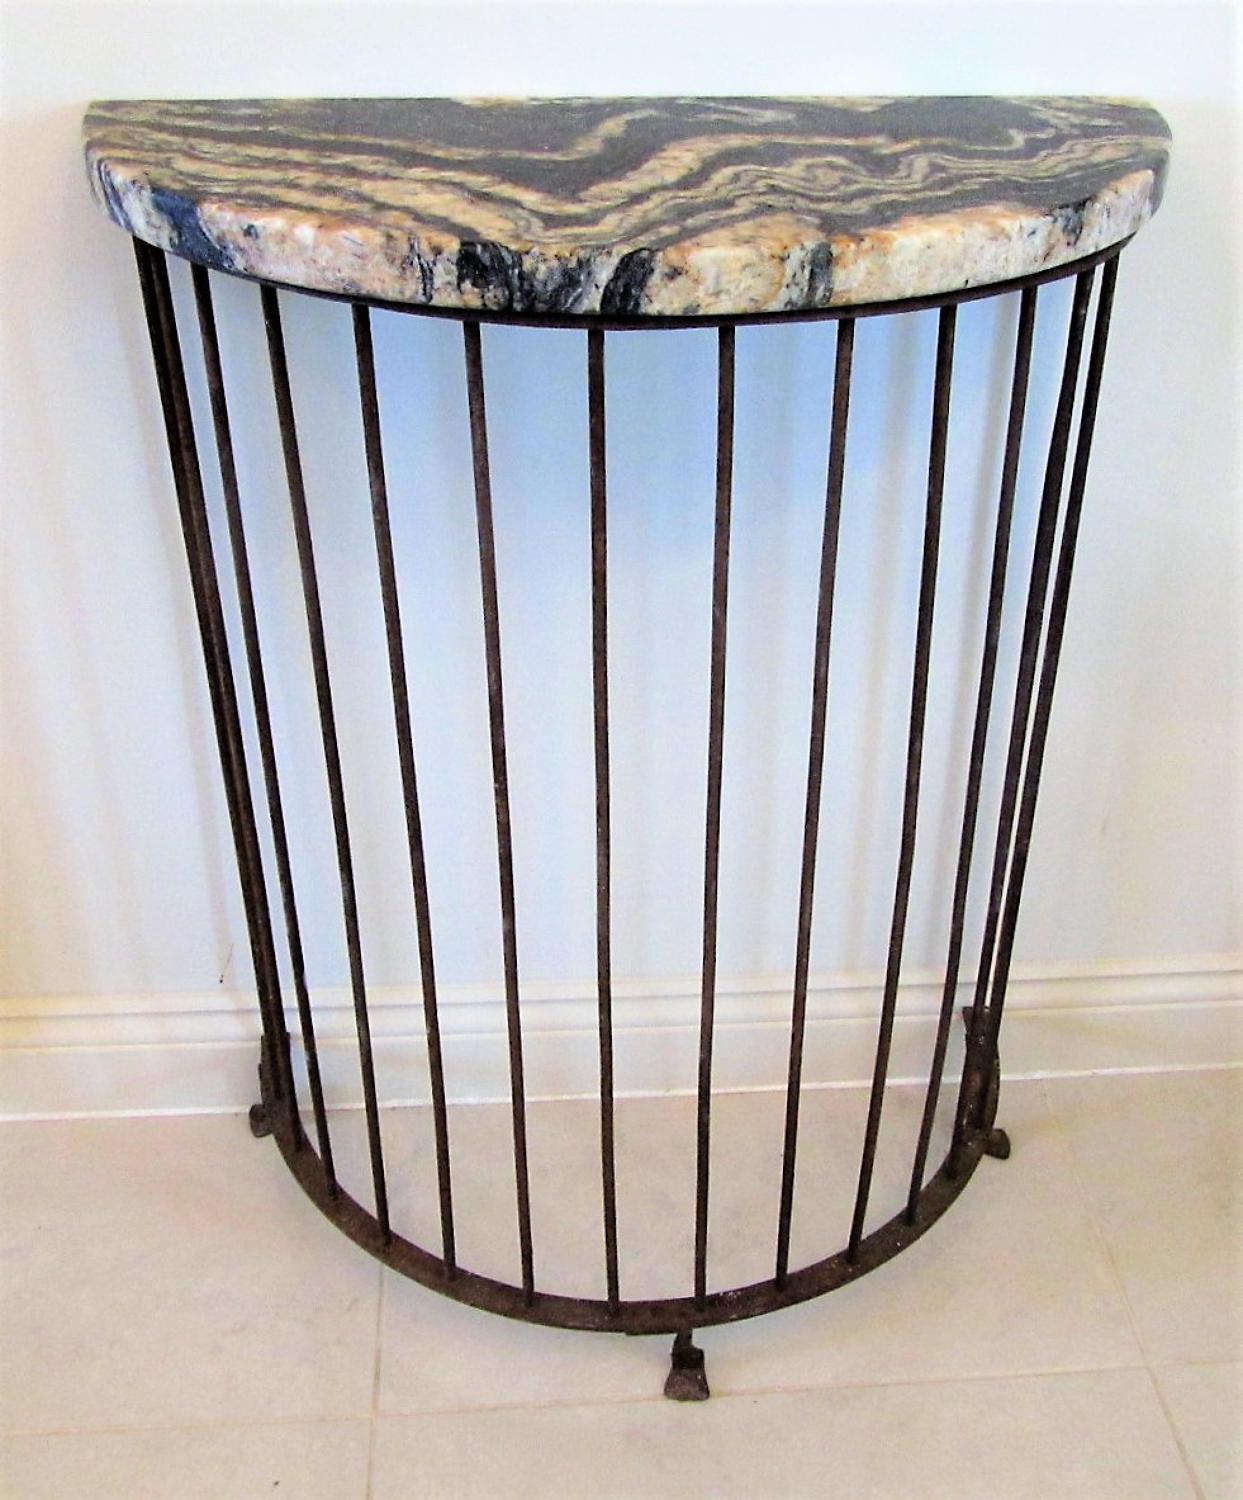 A wrought iron console table